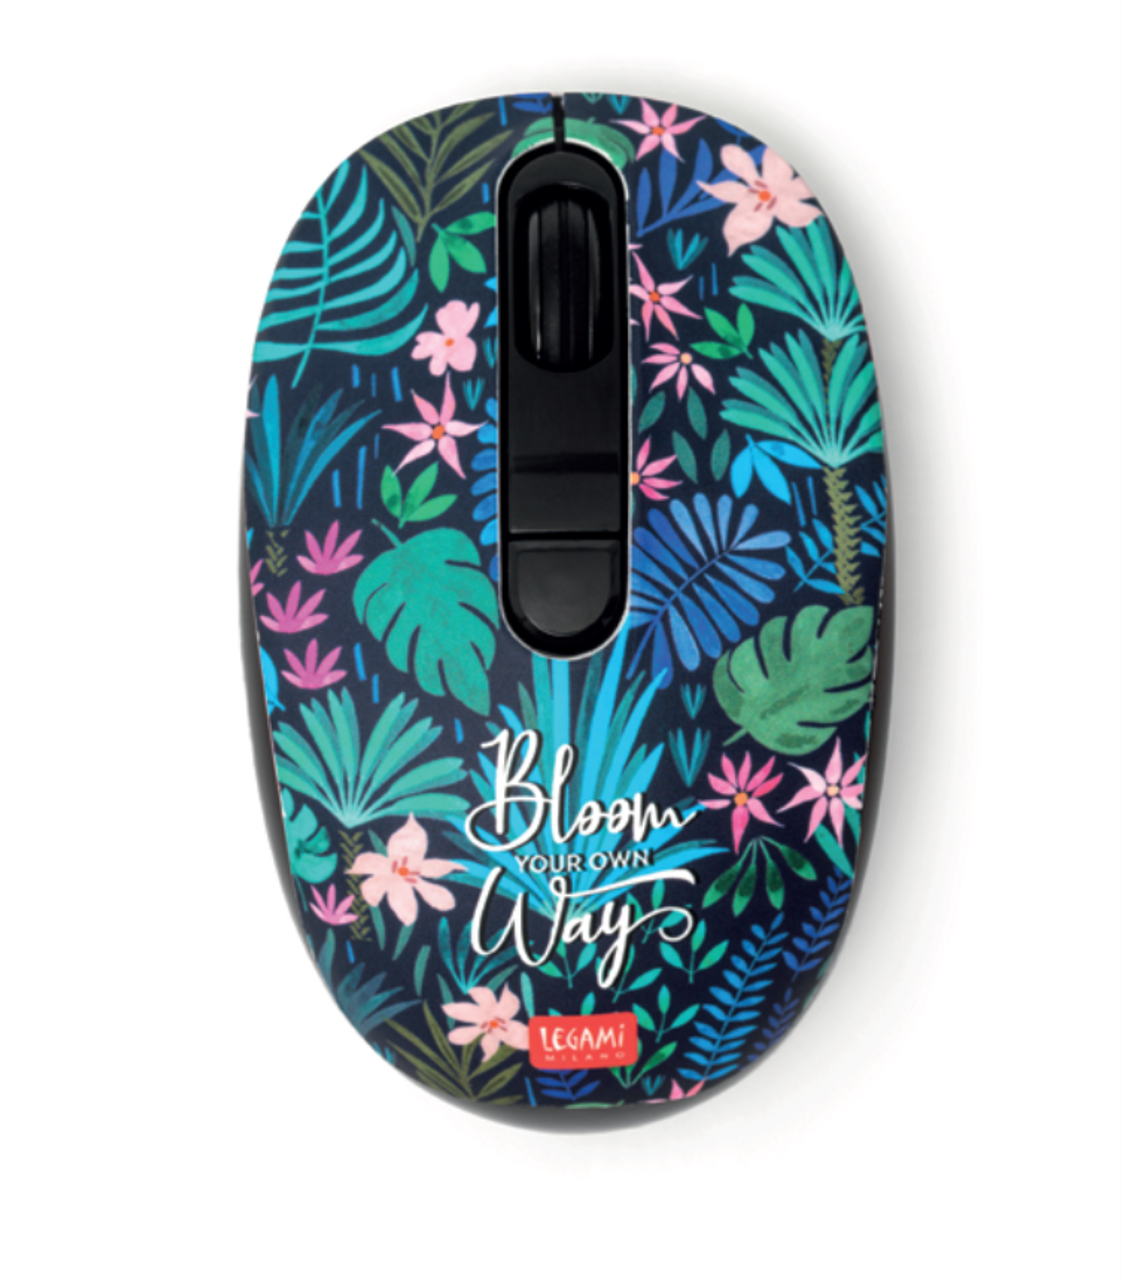 WIRELESS MOUSE - FLORA - PACK OF 4